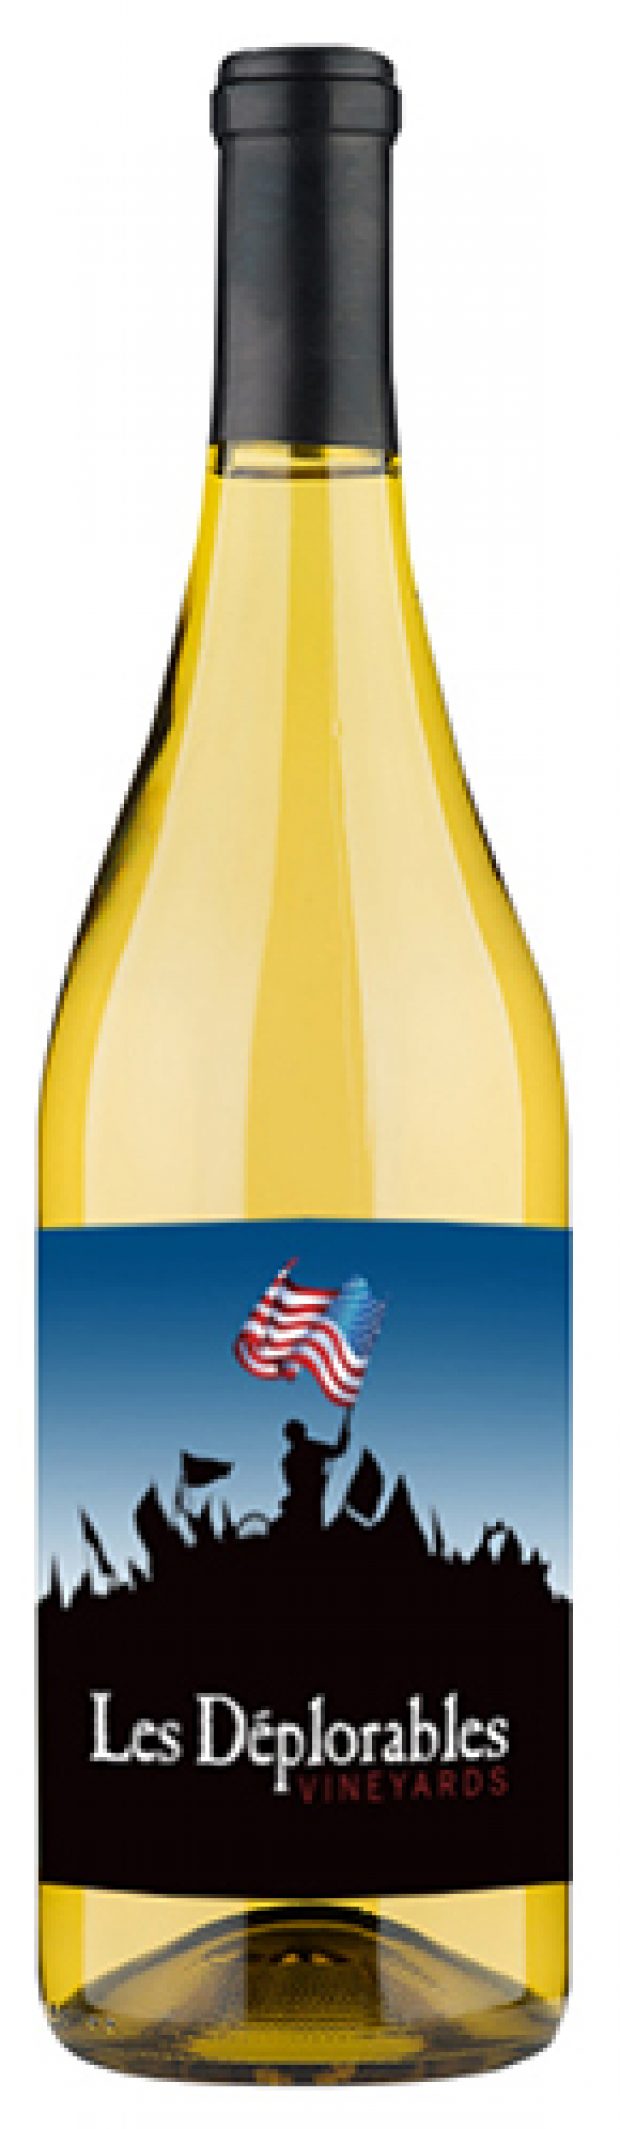 This 2014 Chardonnay was made in the U.S.A.